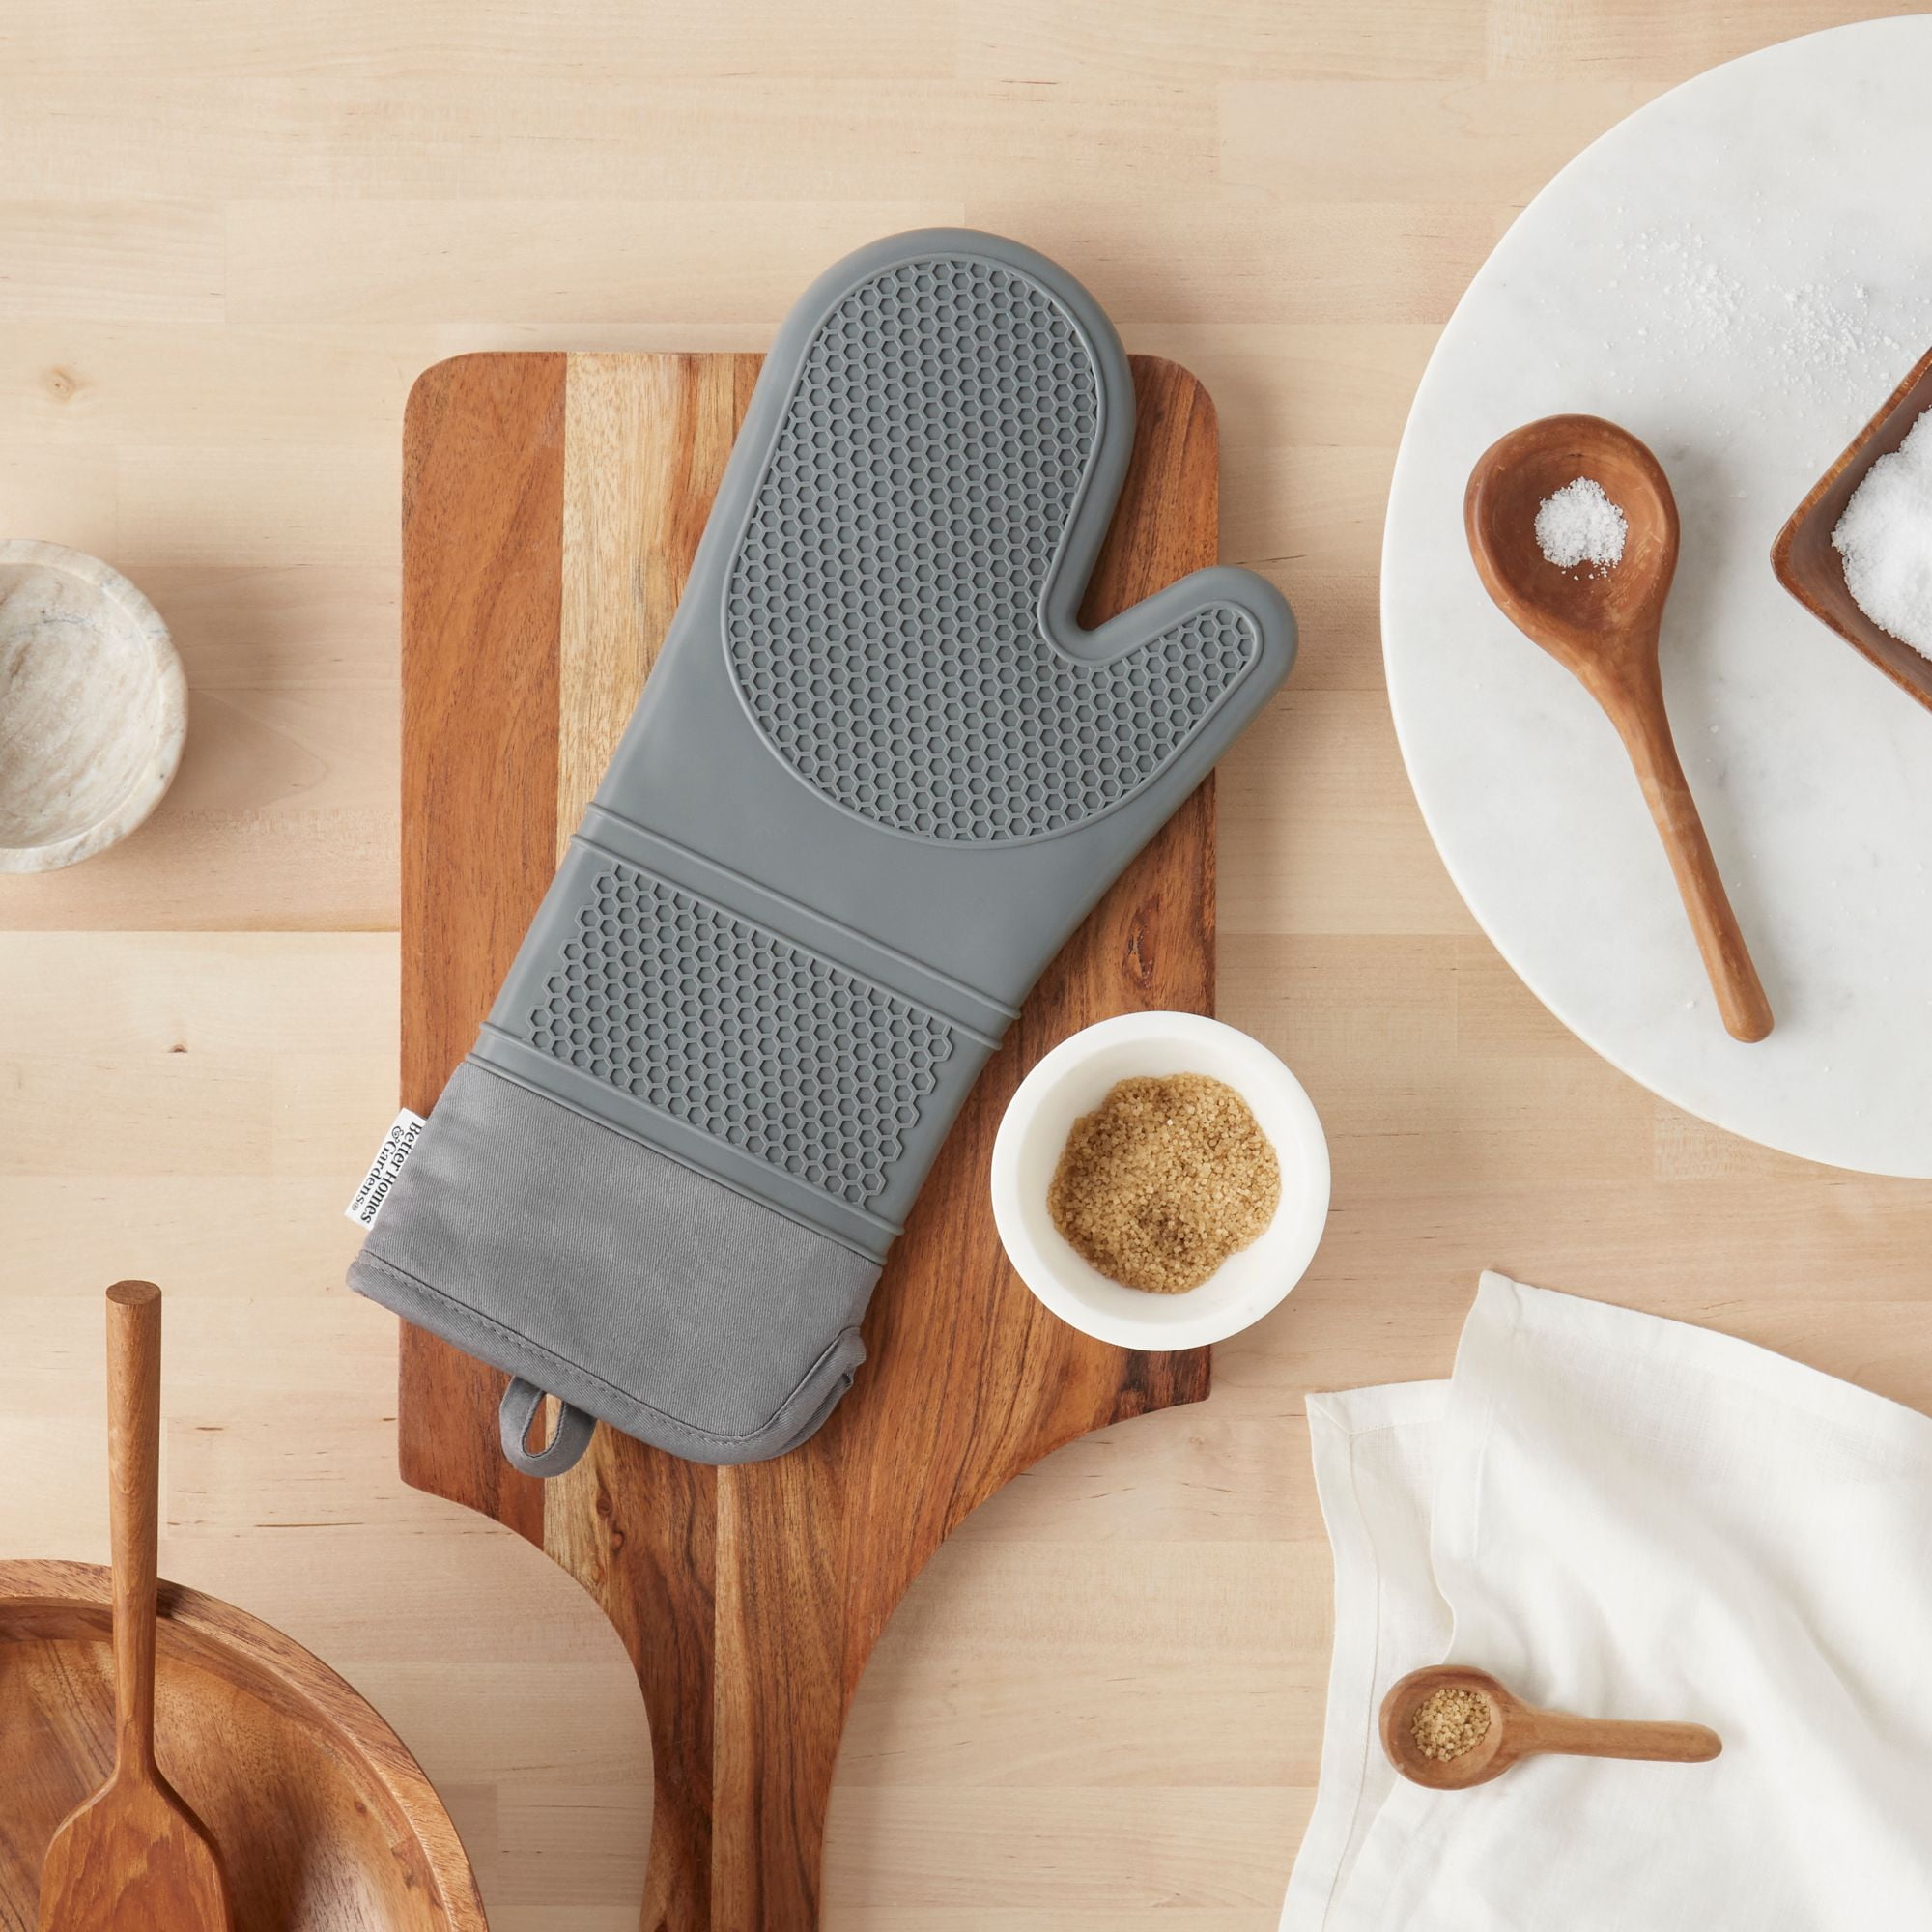 Pampered Chef Silicone Oven Mitt Set